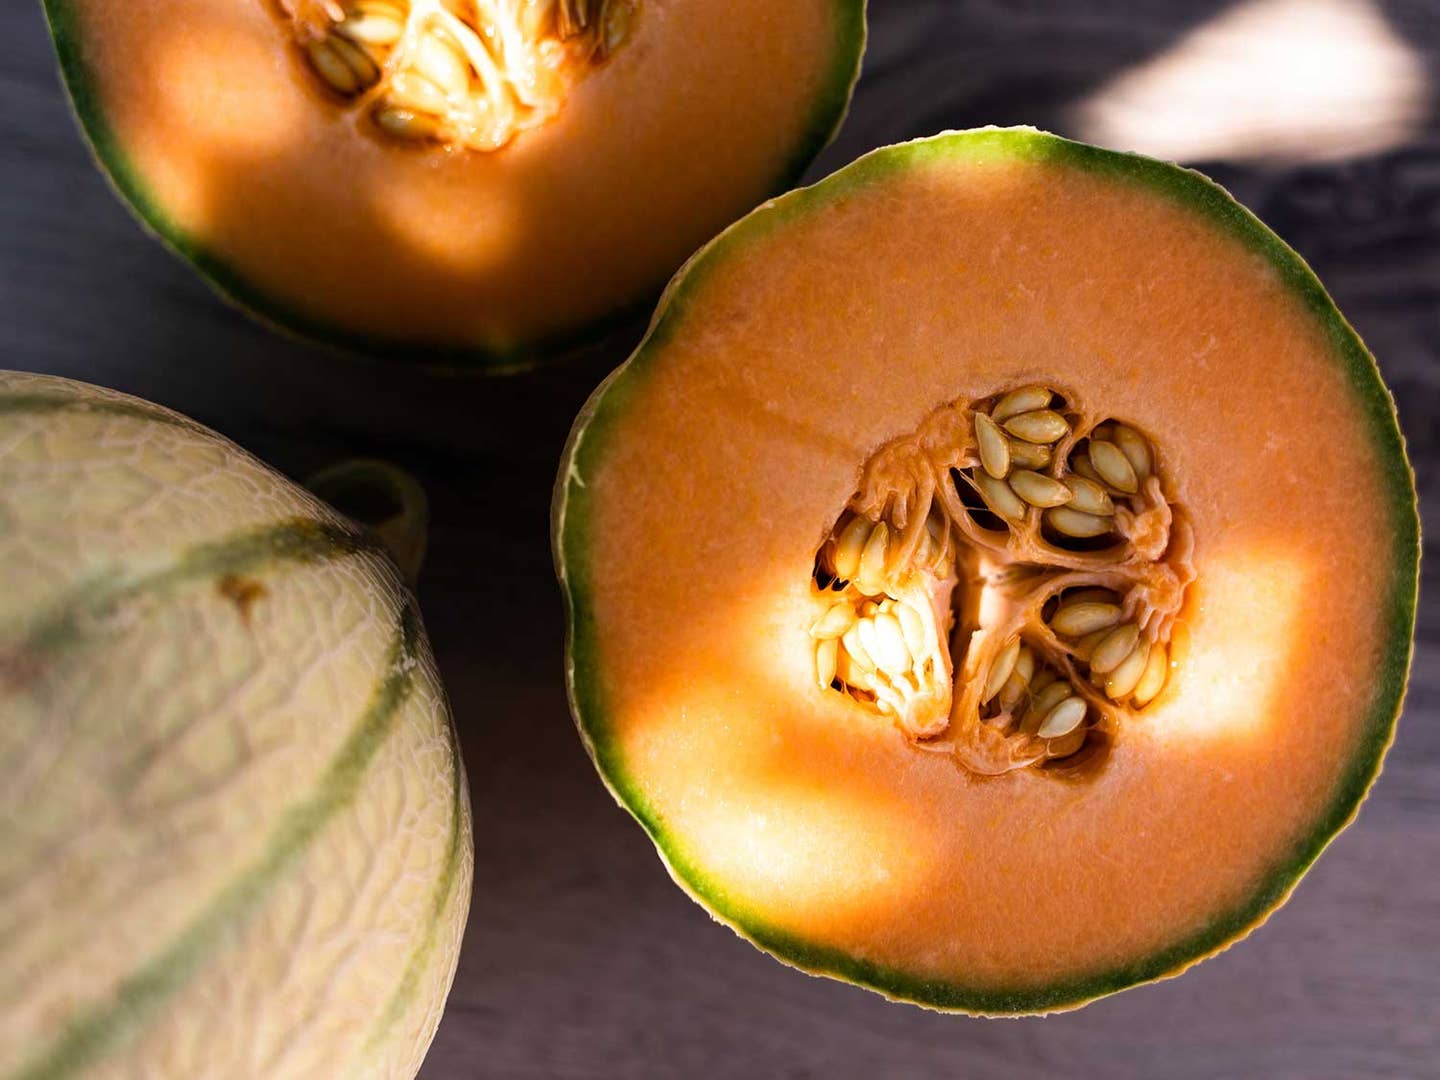 This French Melon Is Everything Cantaloupe Wishes It Could Be